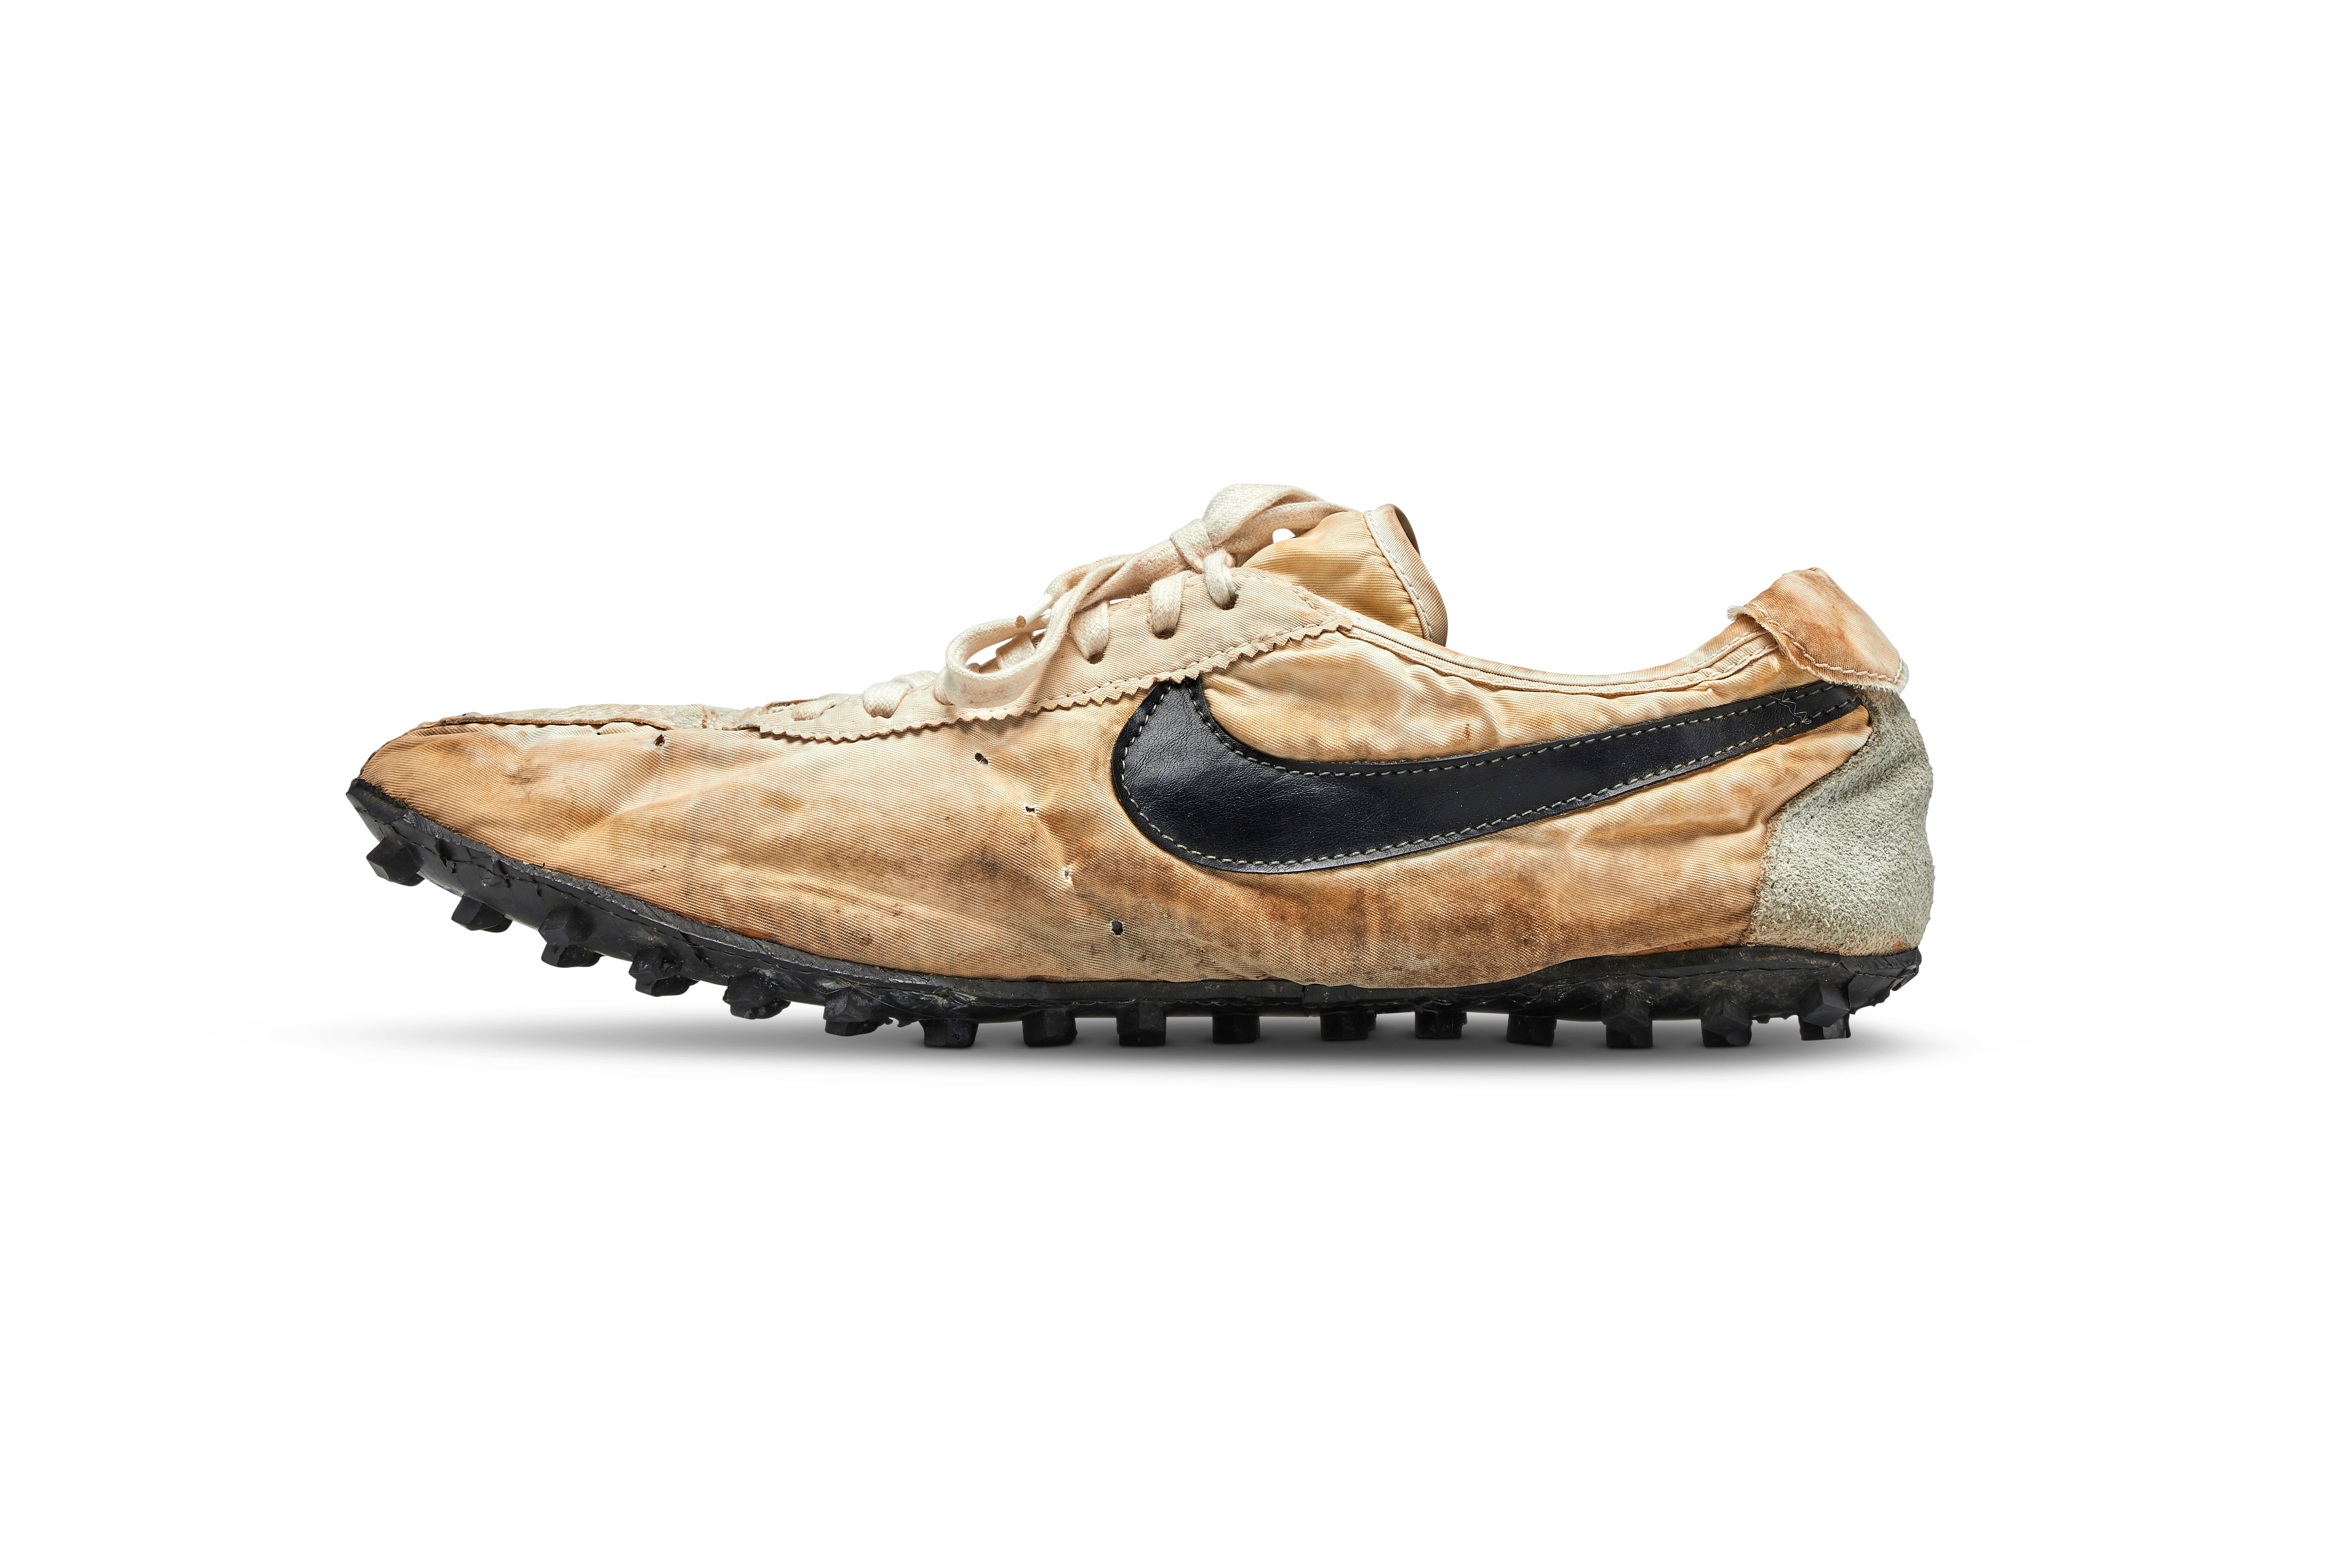 Me sorprendió intervalo Jugar juegos de computadora The 1972 Nike 'Moon Shoe' Sells for $437,500 at Sotheby's, Setting a New  World Record for Sneakers at Auction